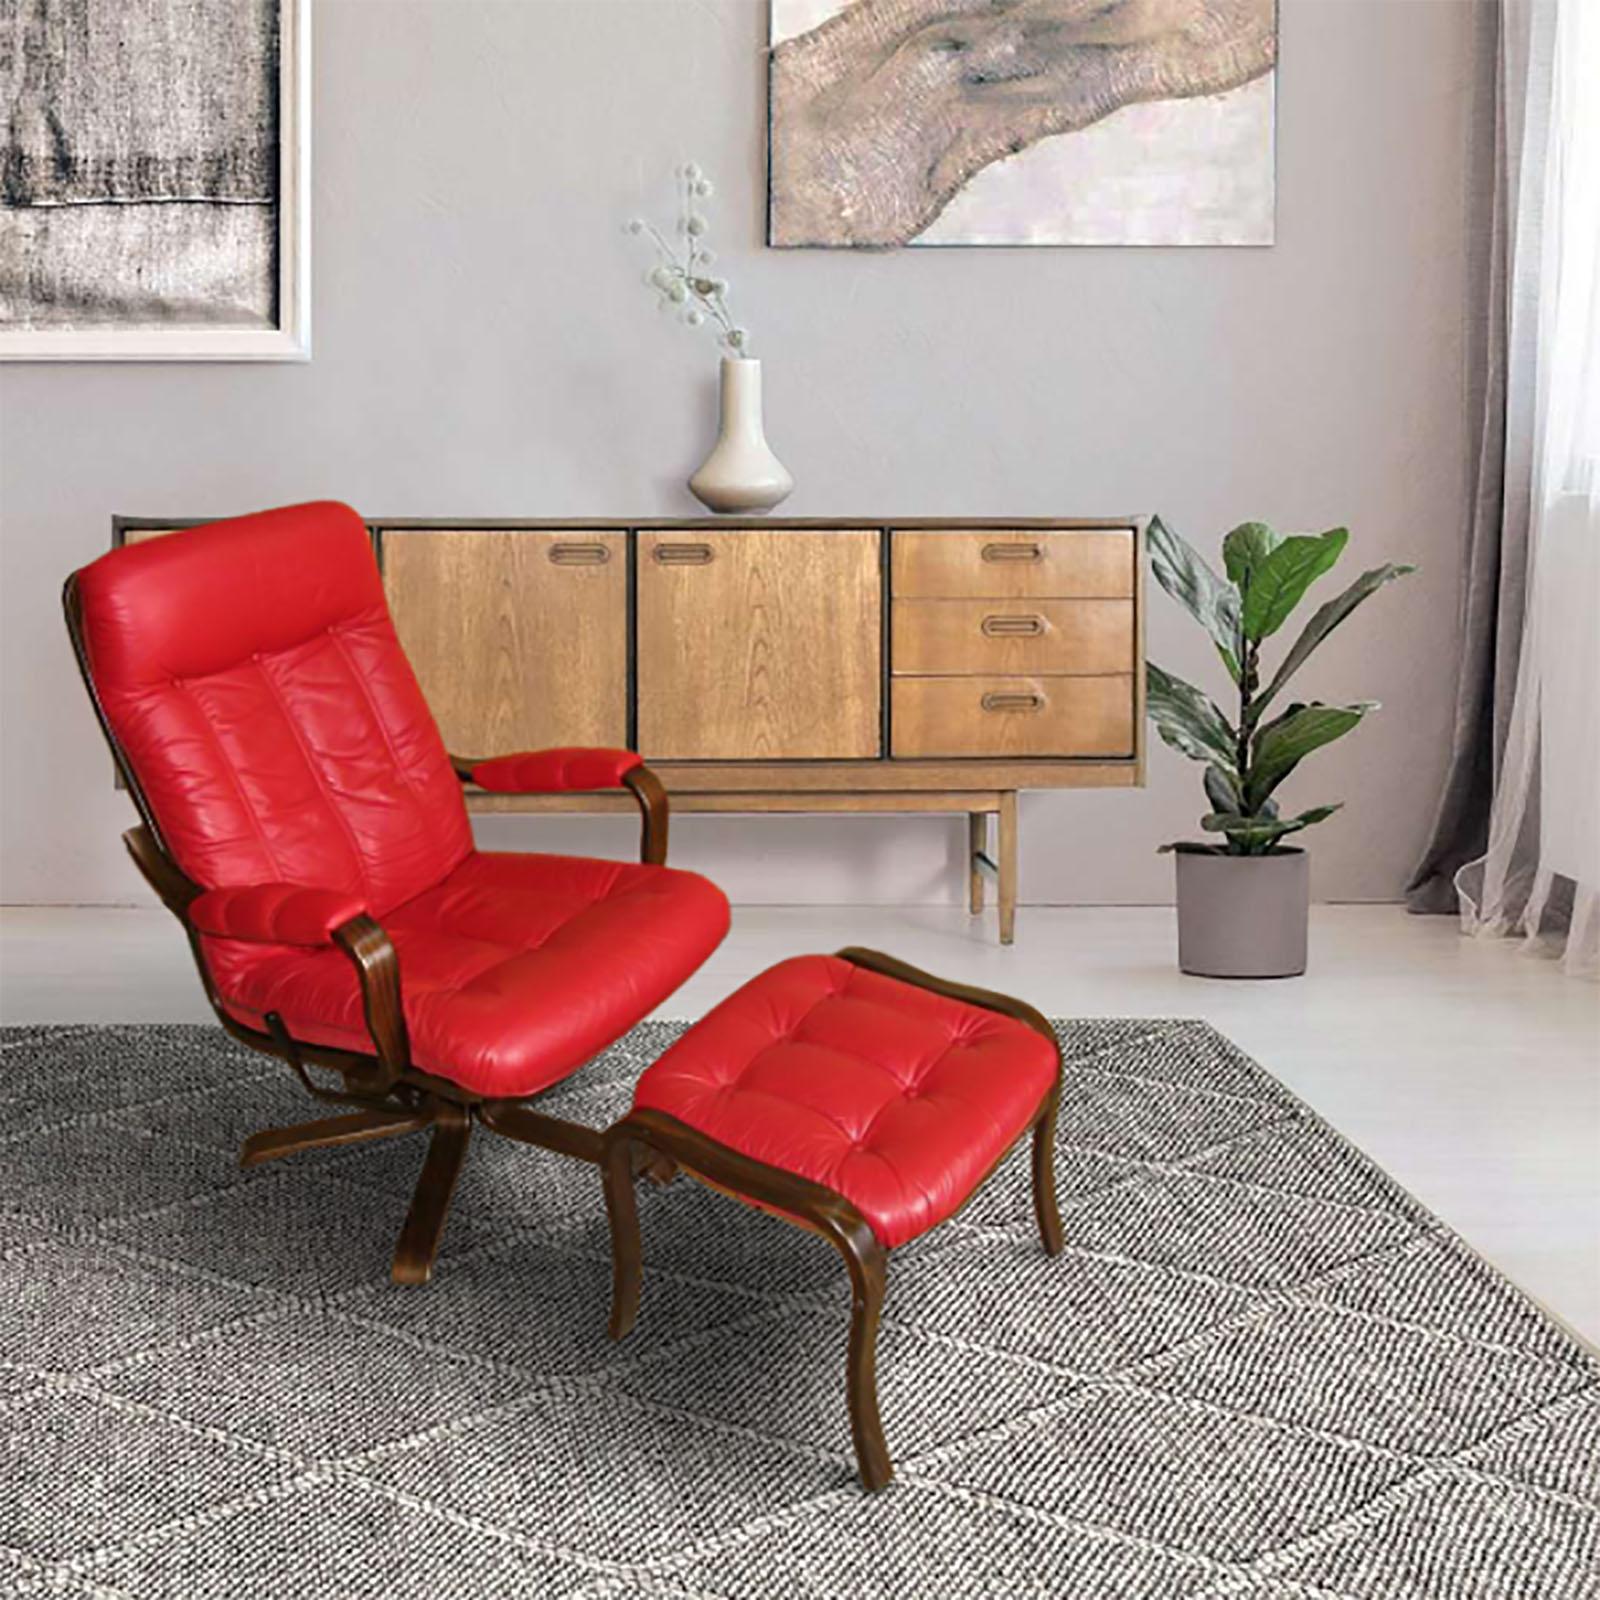 Göte Möbel Swivel armchair with footrest, Sweden, 1970s, 2 sets available. A set is comprising 1 armchair and 1 footrest.
Very comfortable swivel armchair with footrest, stained beech with red soft leather upholstery. Underside the upholstery with